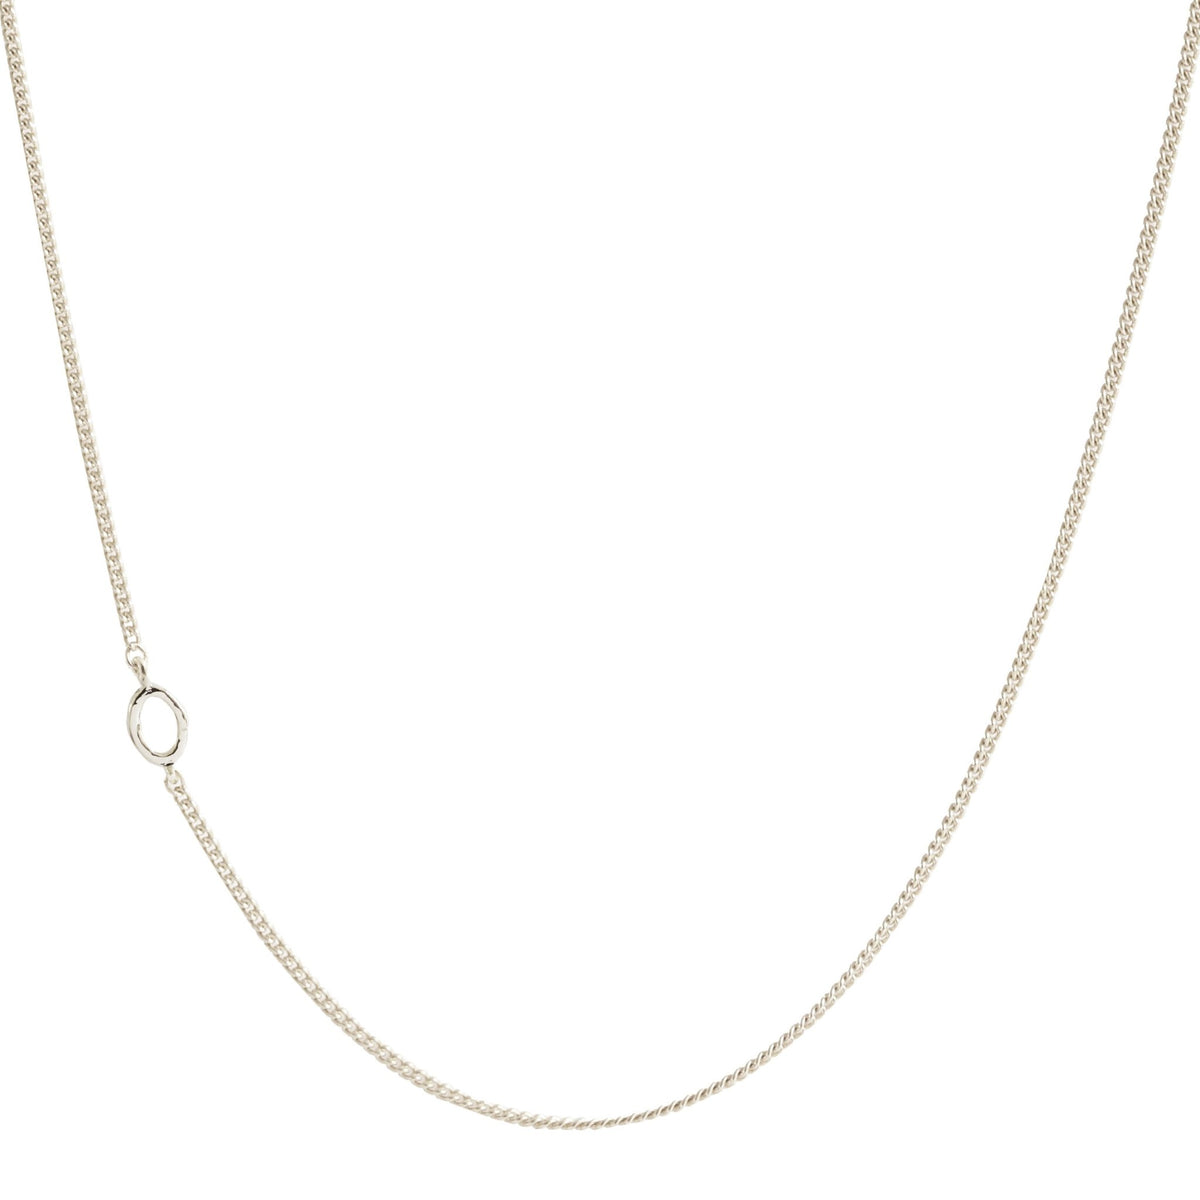 NOTABLE OFFSET INITIAL NECKLACE - O - GOLD, ROSE GOLD, OR SILVER - SO PRETTY CARA COTTER